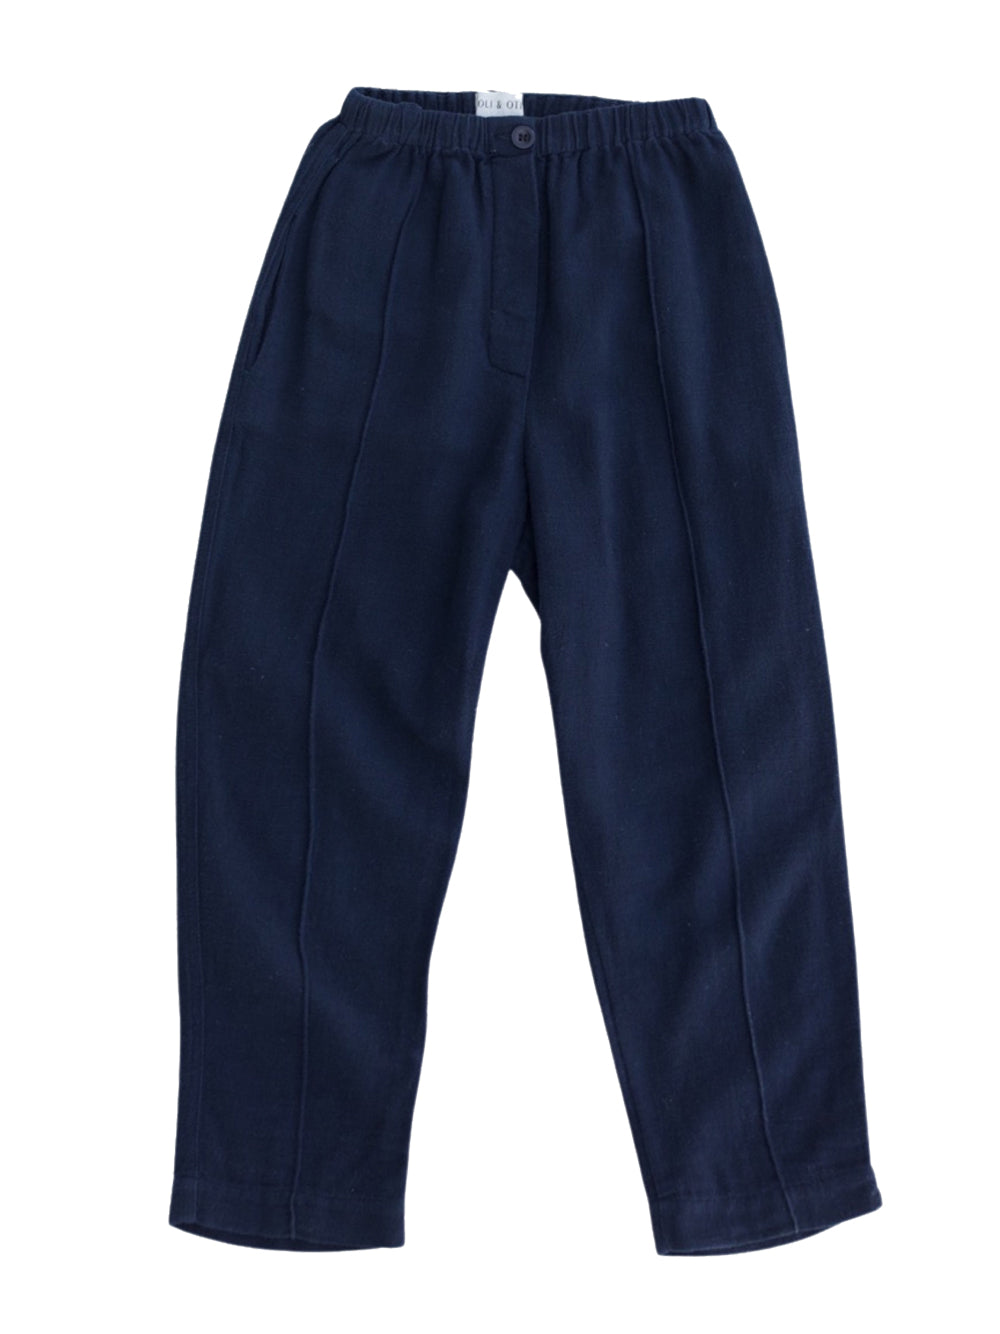 Hassan Navy Trousers